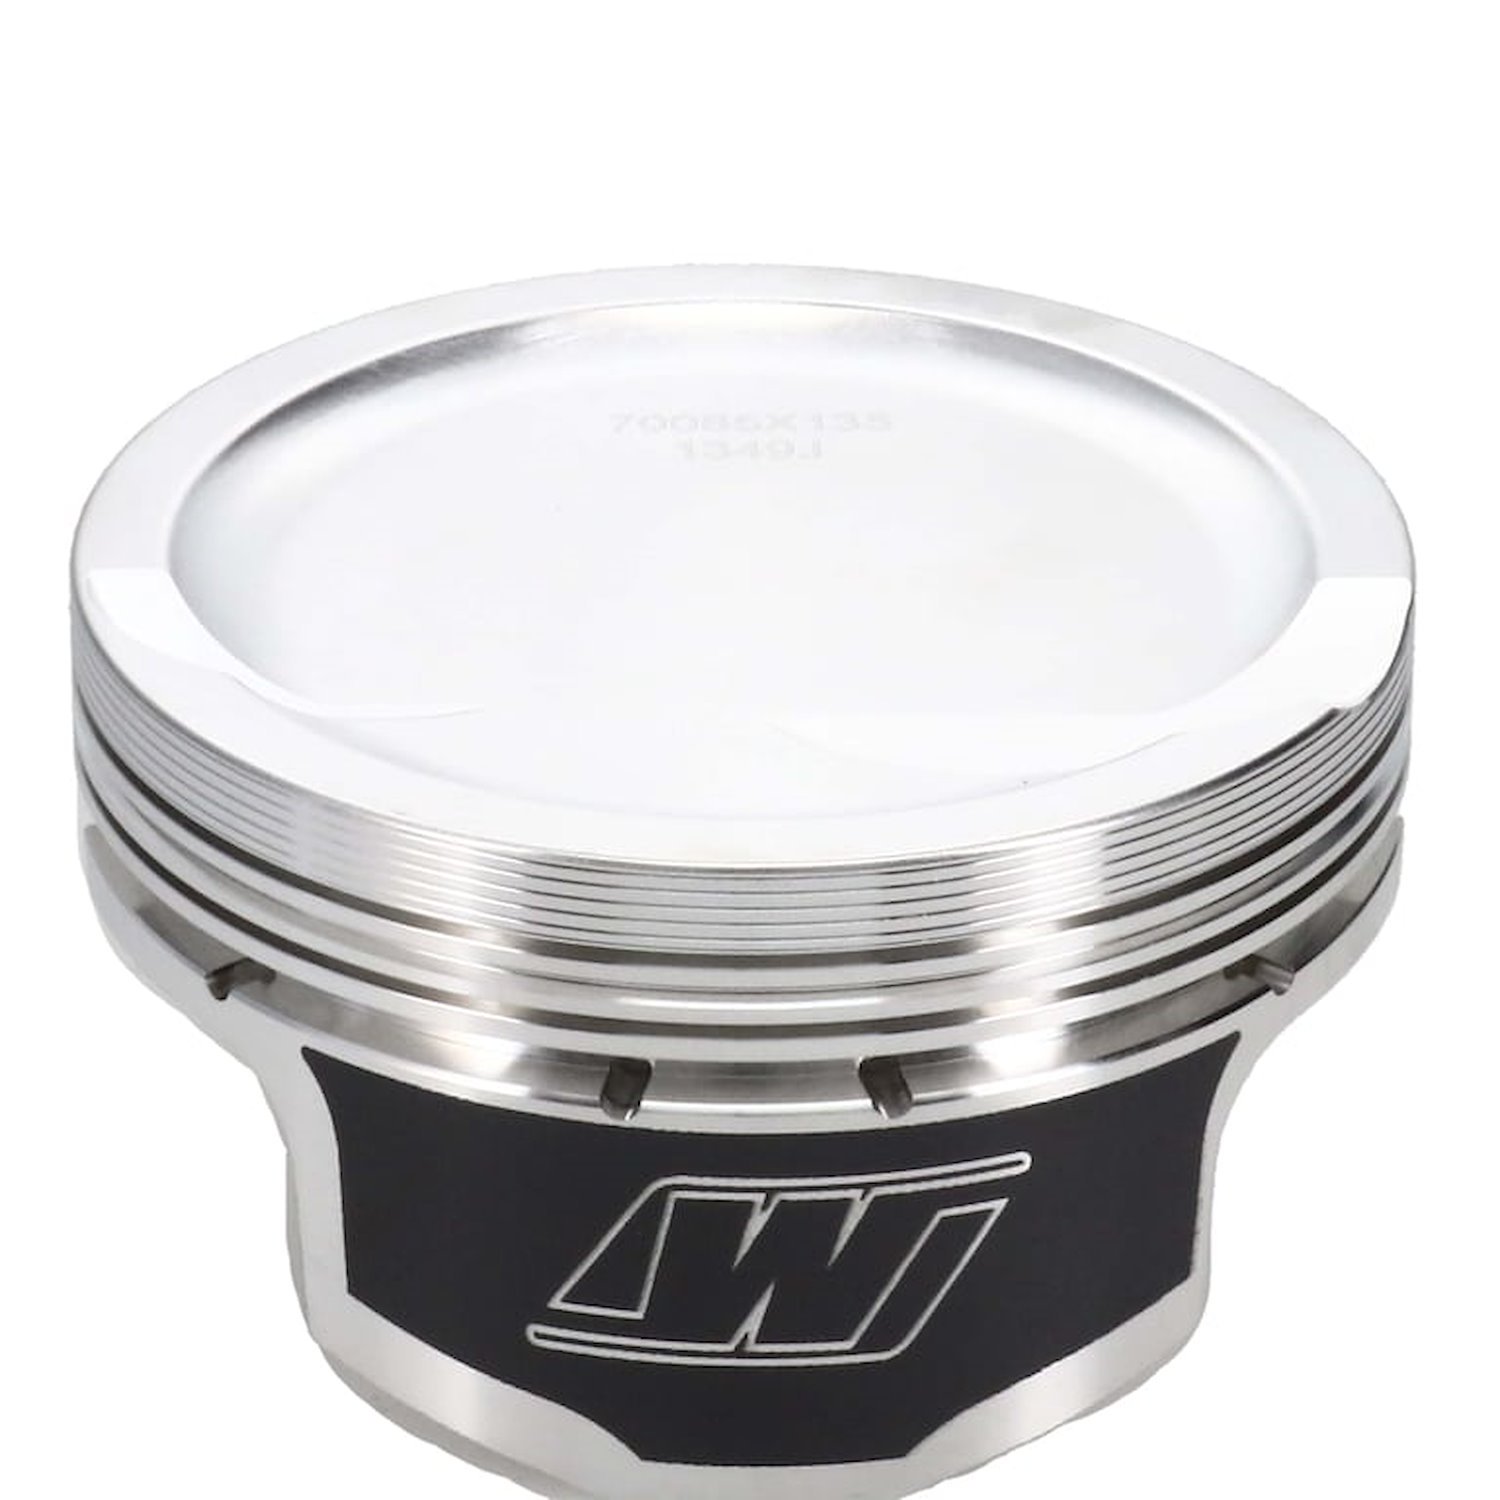 RED0085X165 RED-Series Piston Set, Chevy LS, 4.165 in. Bore, -20 cc Dish